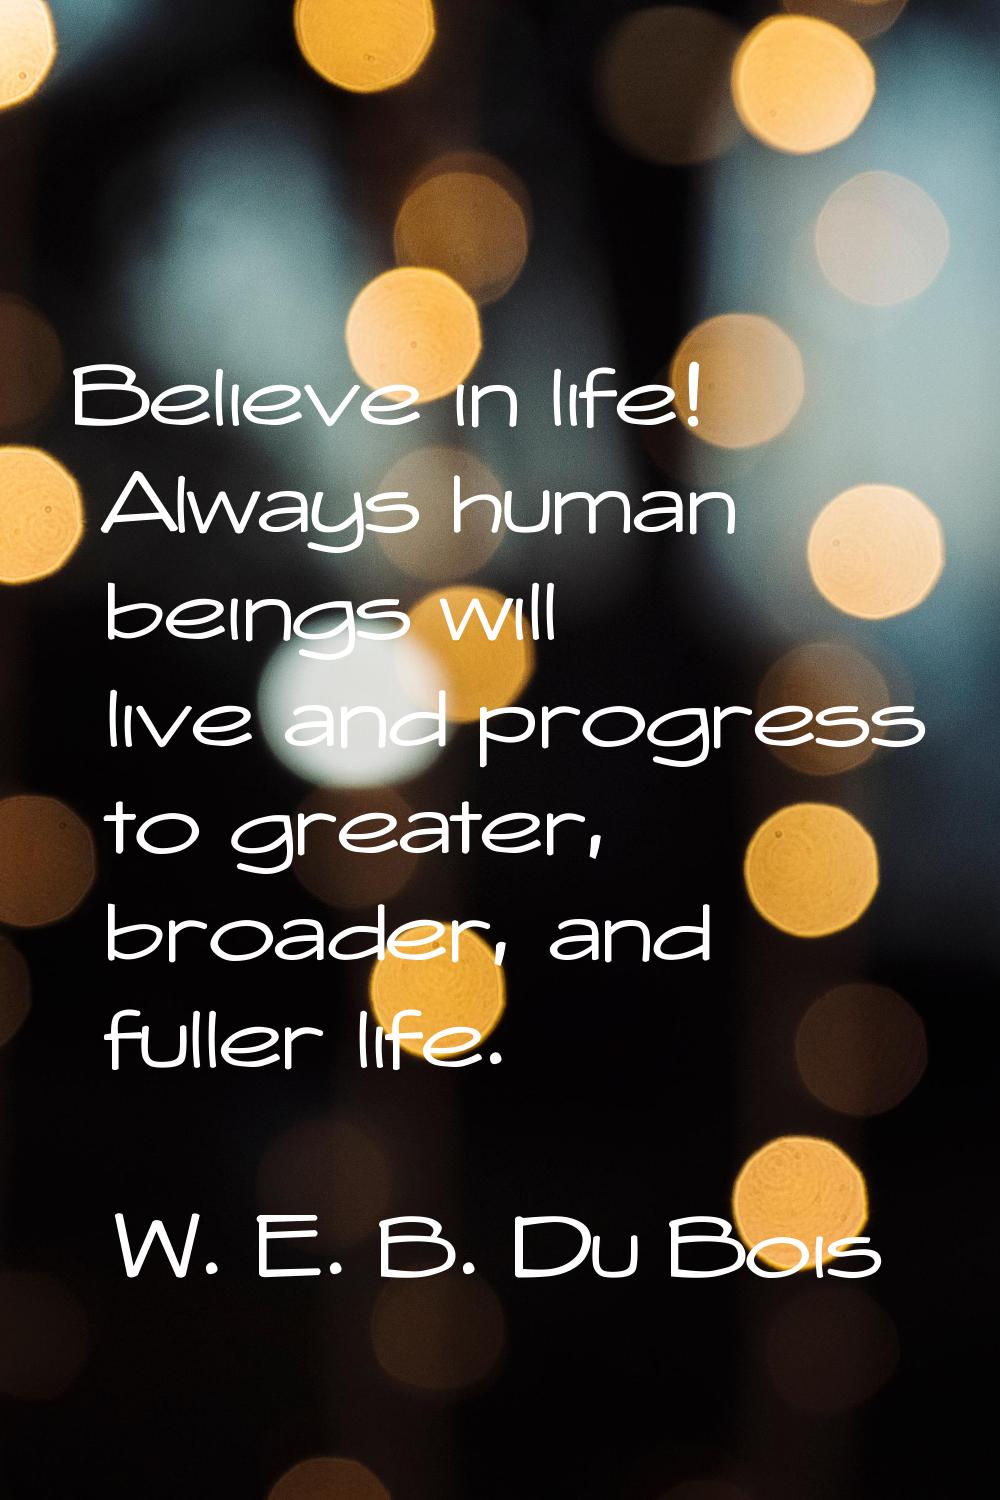 Believe in life! Always human beings will live and progress to greater, broader, and fuller life.